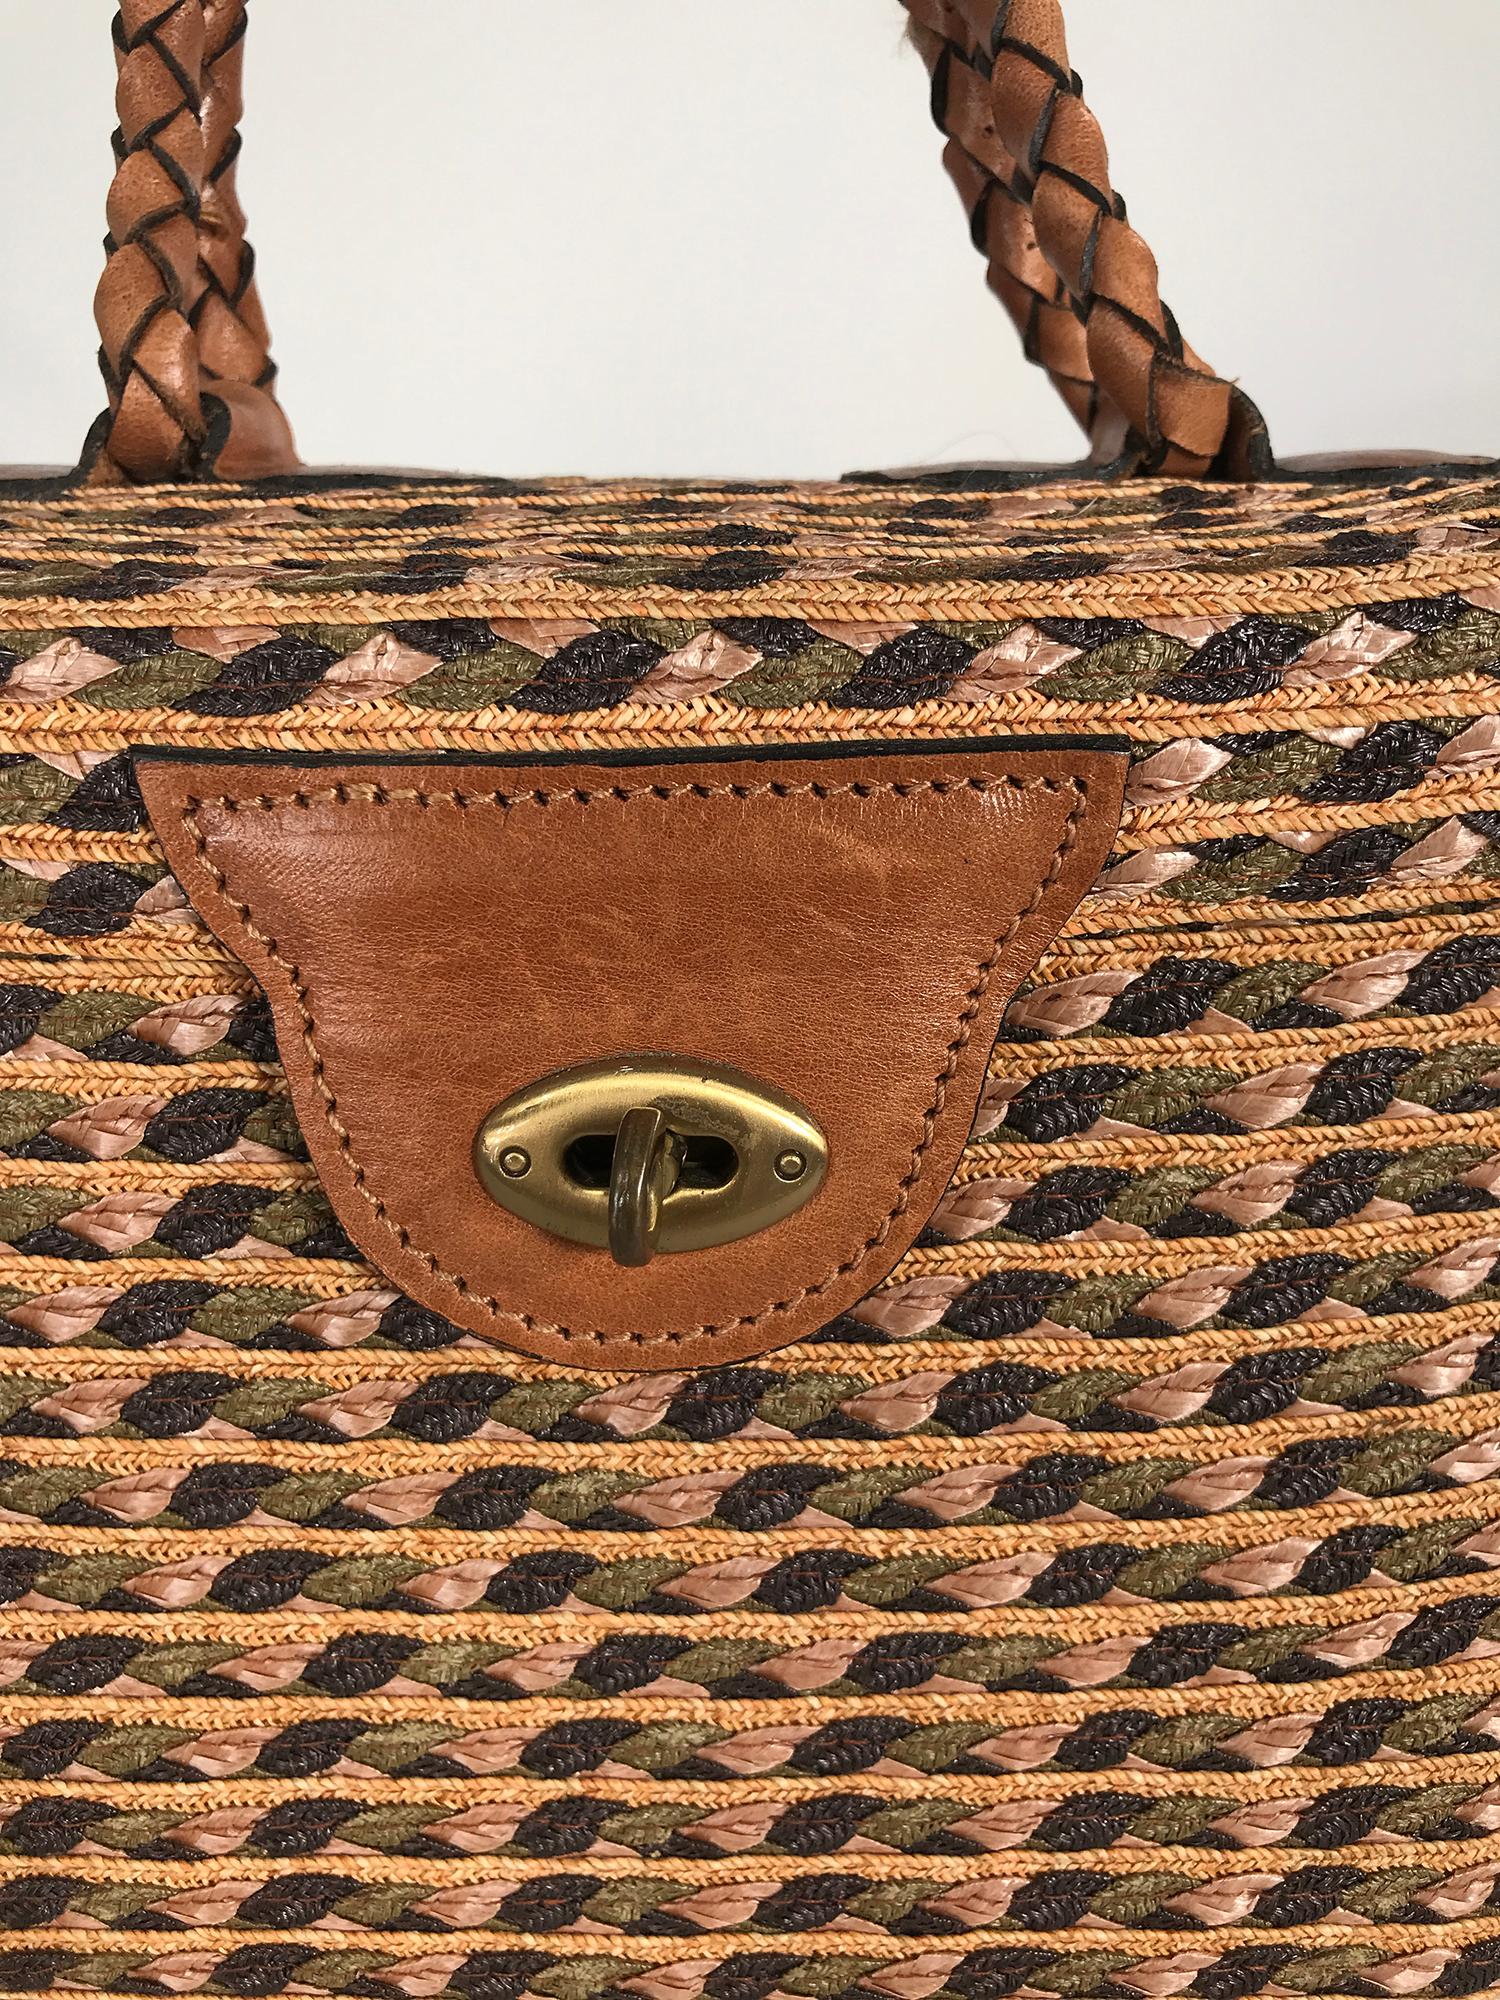 Eric Javits woven raffia, cord & leather handbag. Tightly woven and sewn the bag is done in subtle colours of moss & forest green, tan & cocoa with a braided saddle tan handle and attachments at bag top. The bag has a fitted top and closes at the